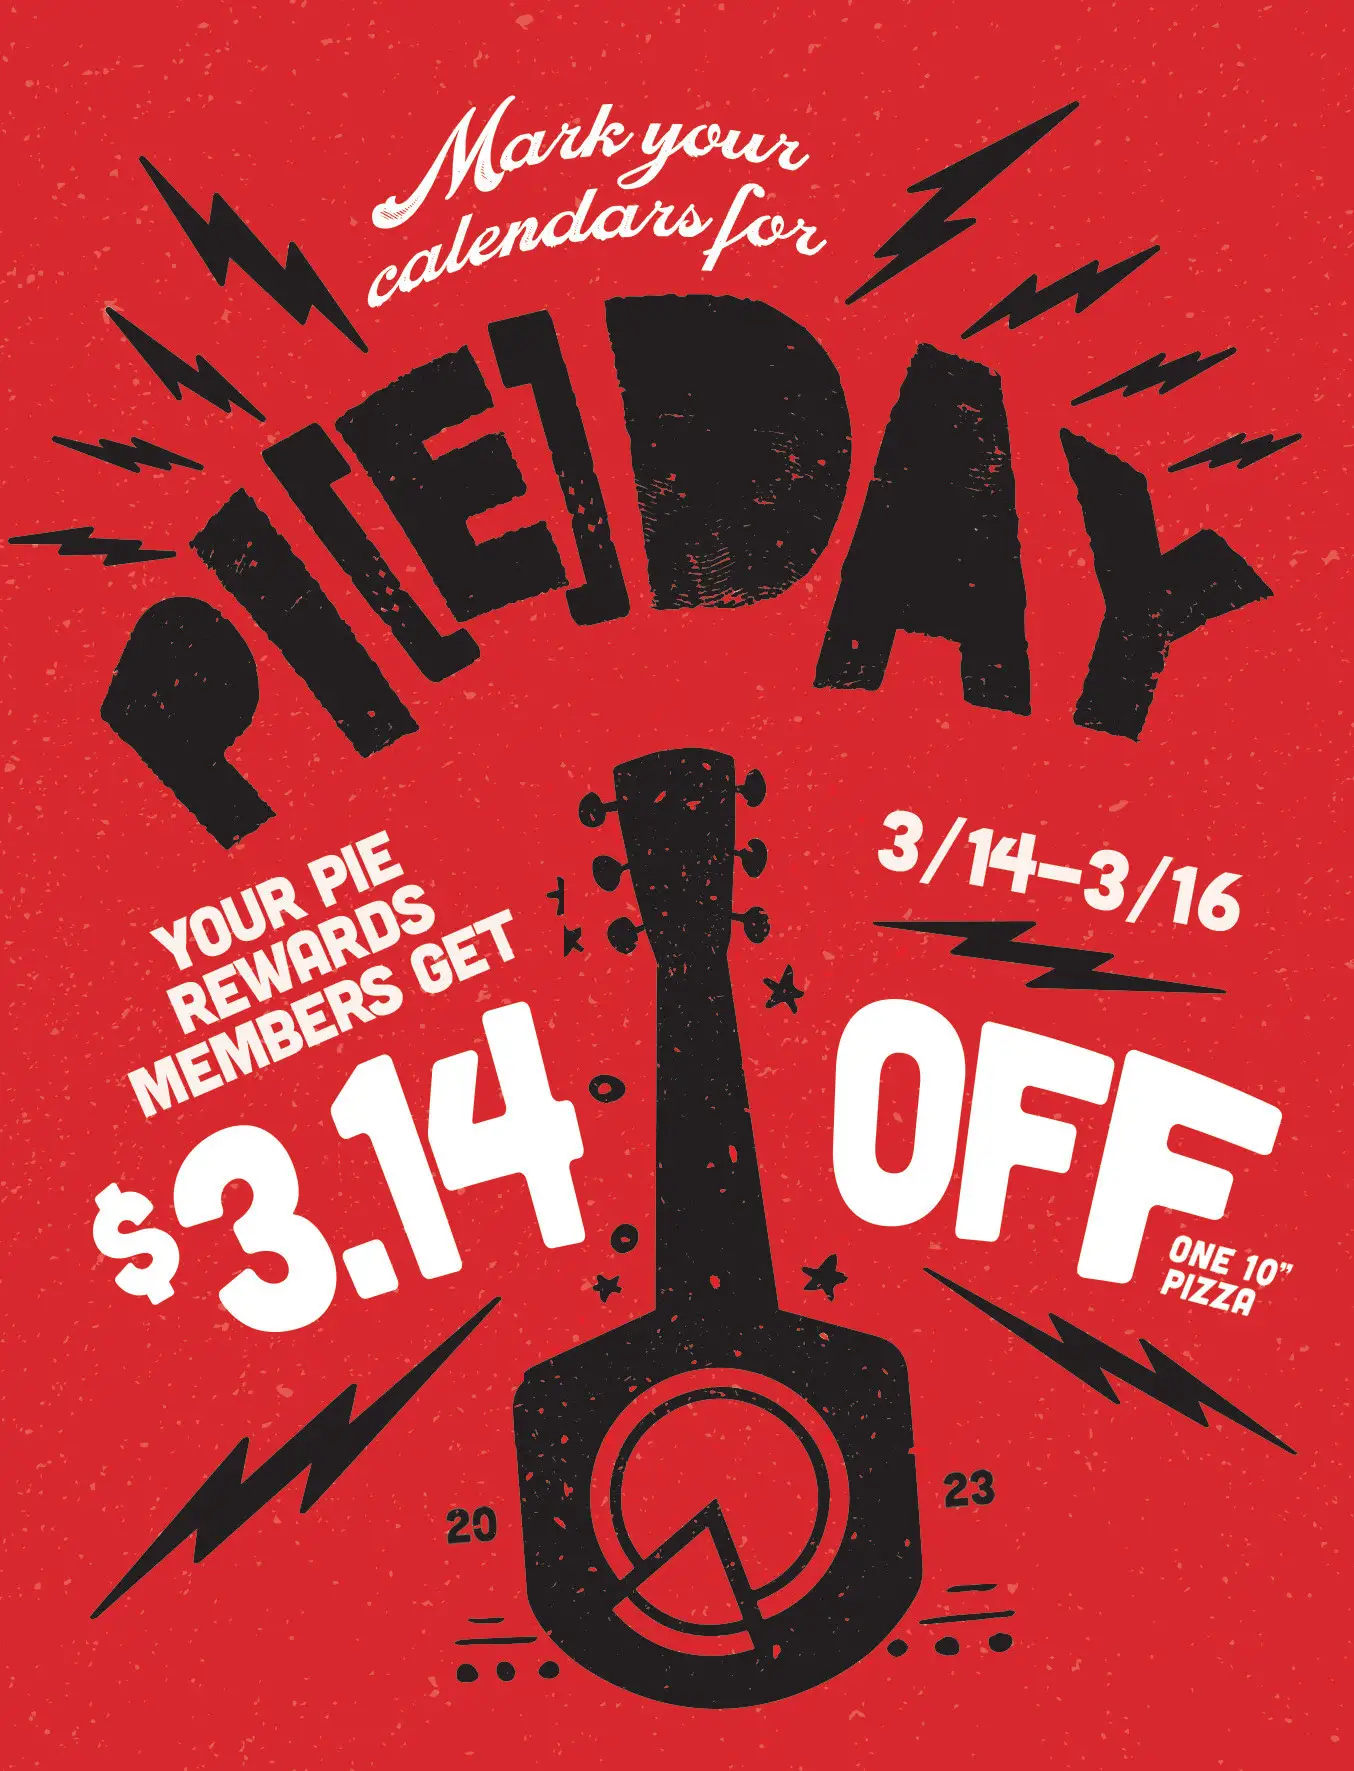 Your Pie Pi Day Pi Day Special: $3.14 off On One 10-inch Pizza For Pie Rewards Members!